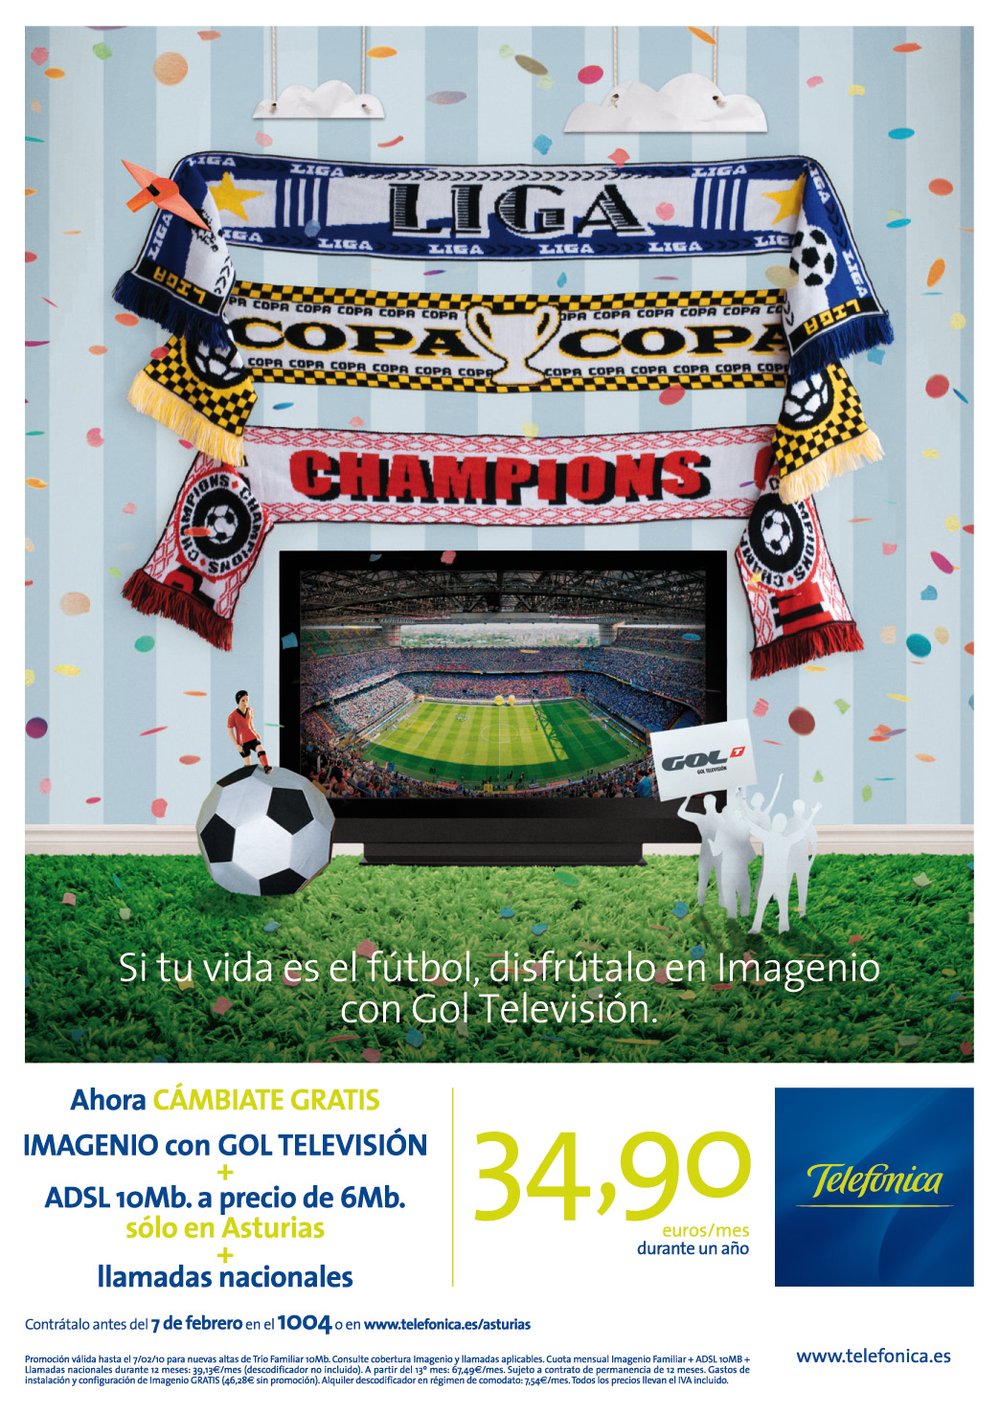 IMAGENIO, TELEFÓNICA'S ON-DEMAND TELEVISION WITH THE MOST IMPORTANT SPORTS COMPETITIONS.